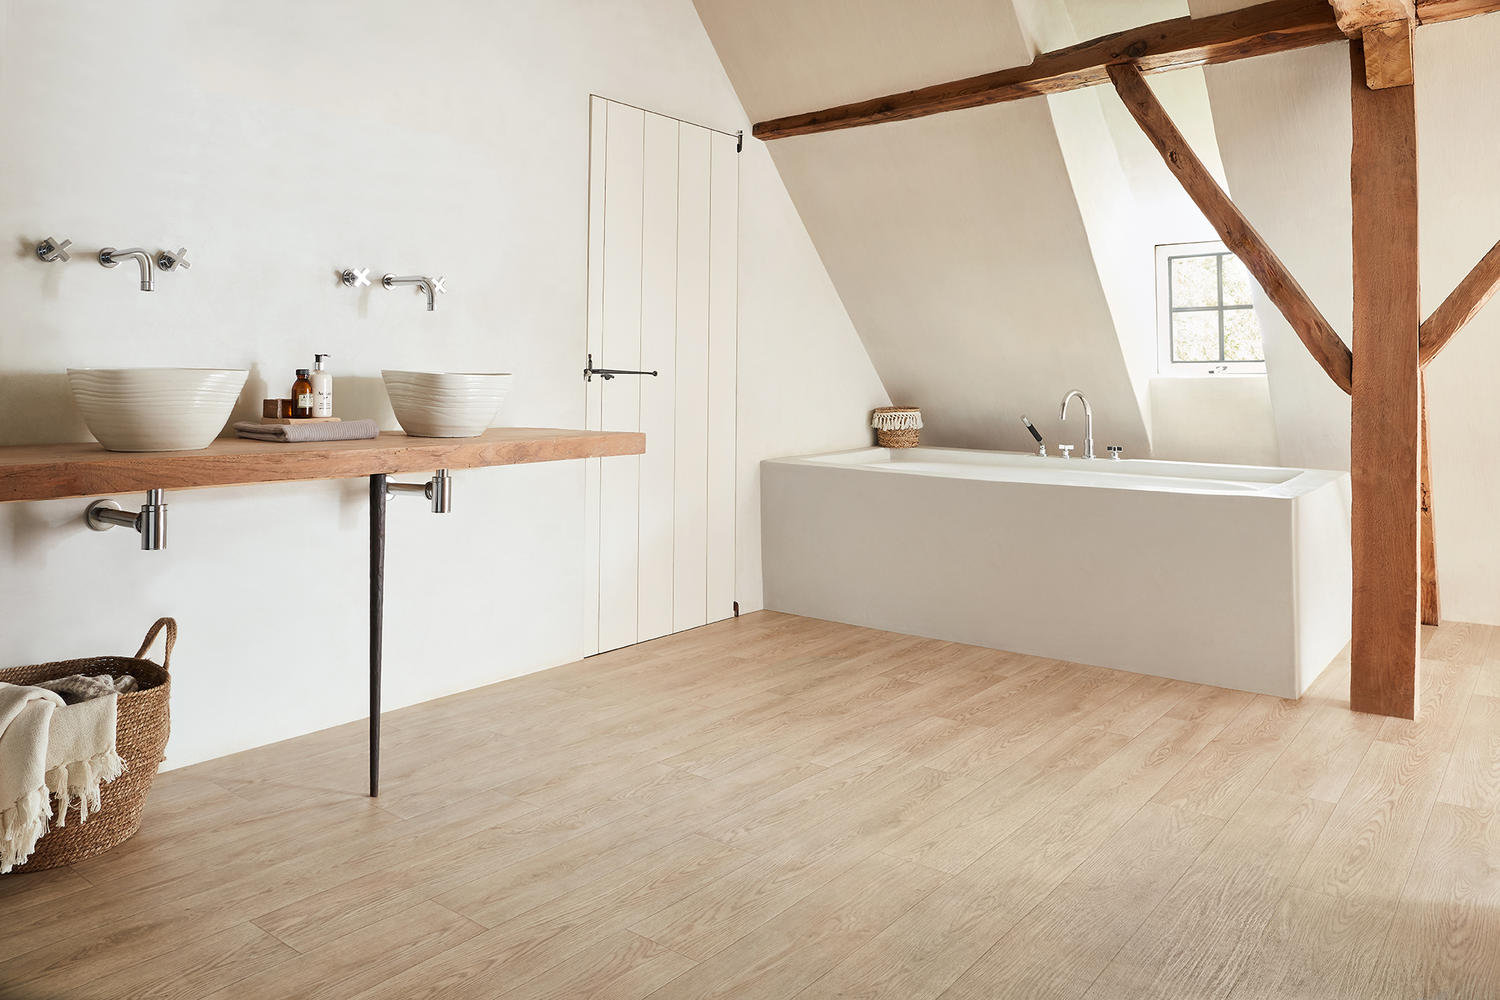 What Is The Best Flooring For Bathrooms, What Flooring Is Recommended For Bathrooms